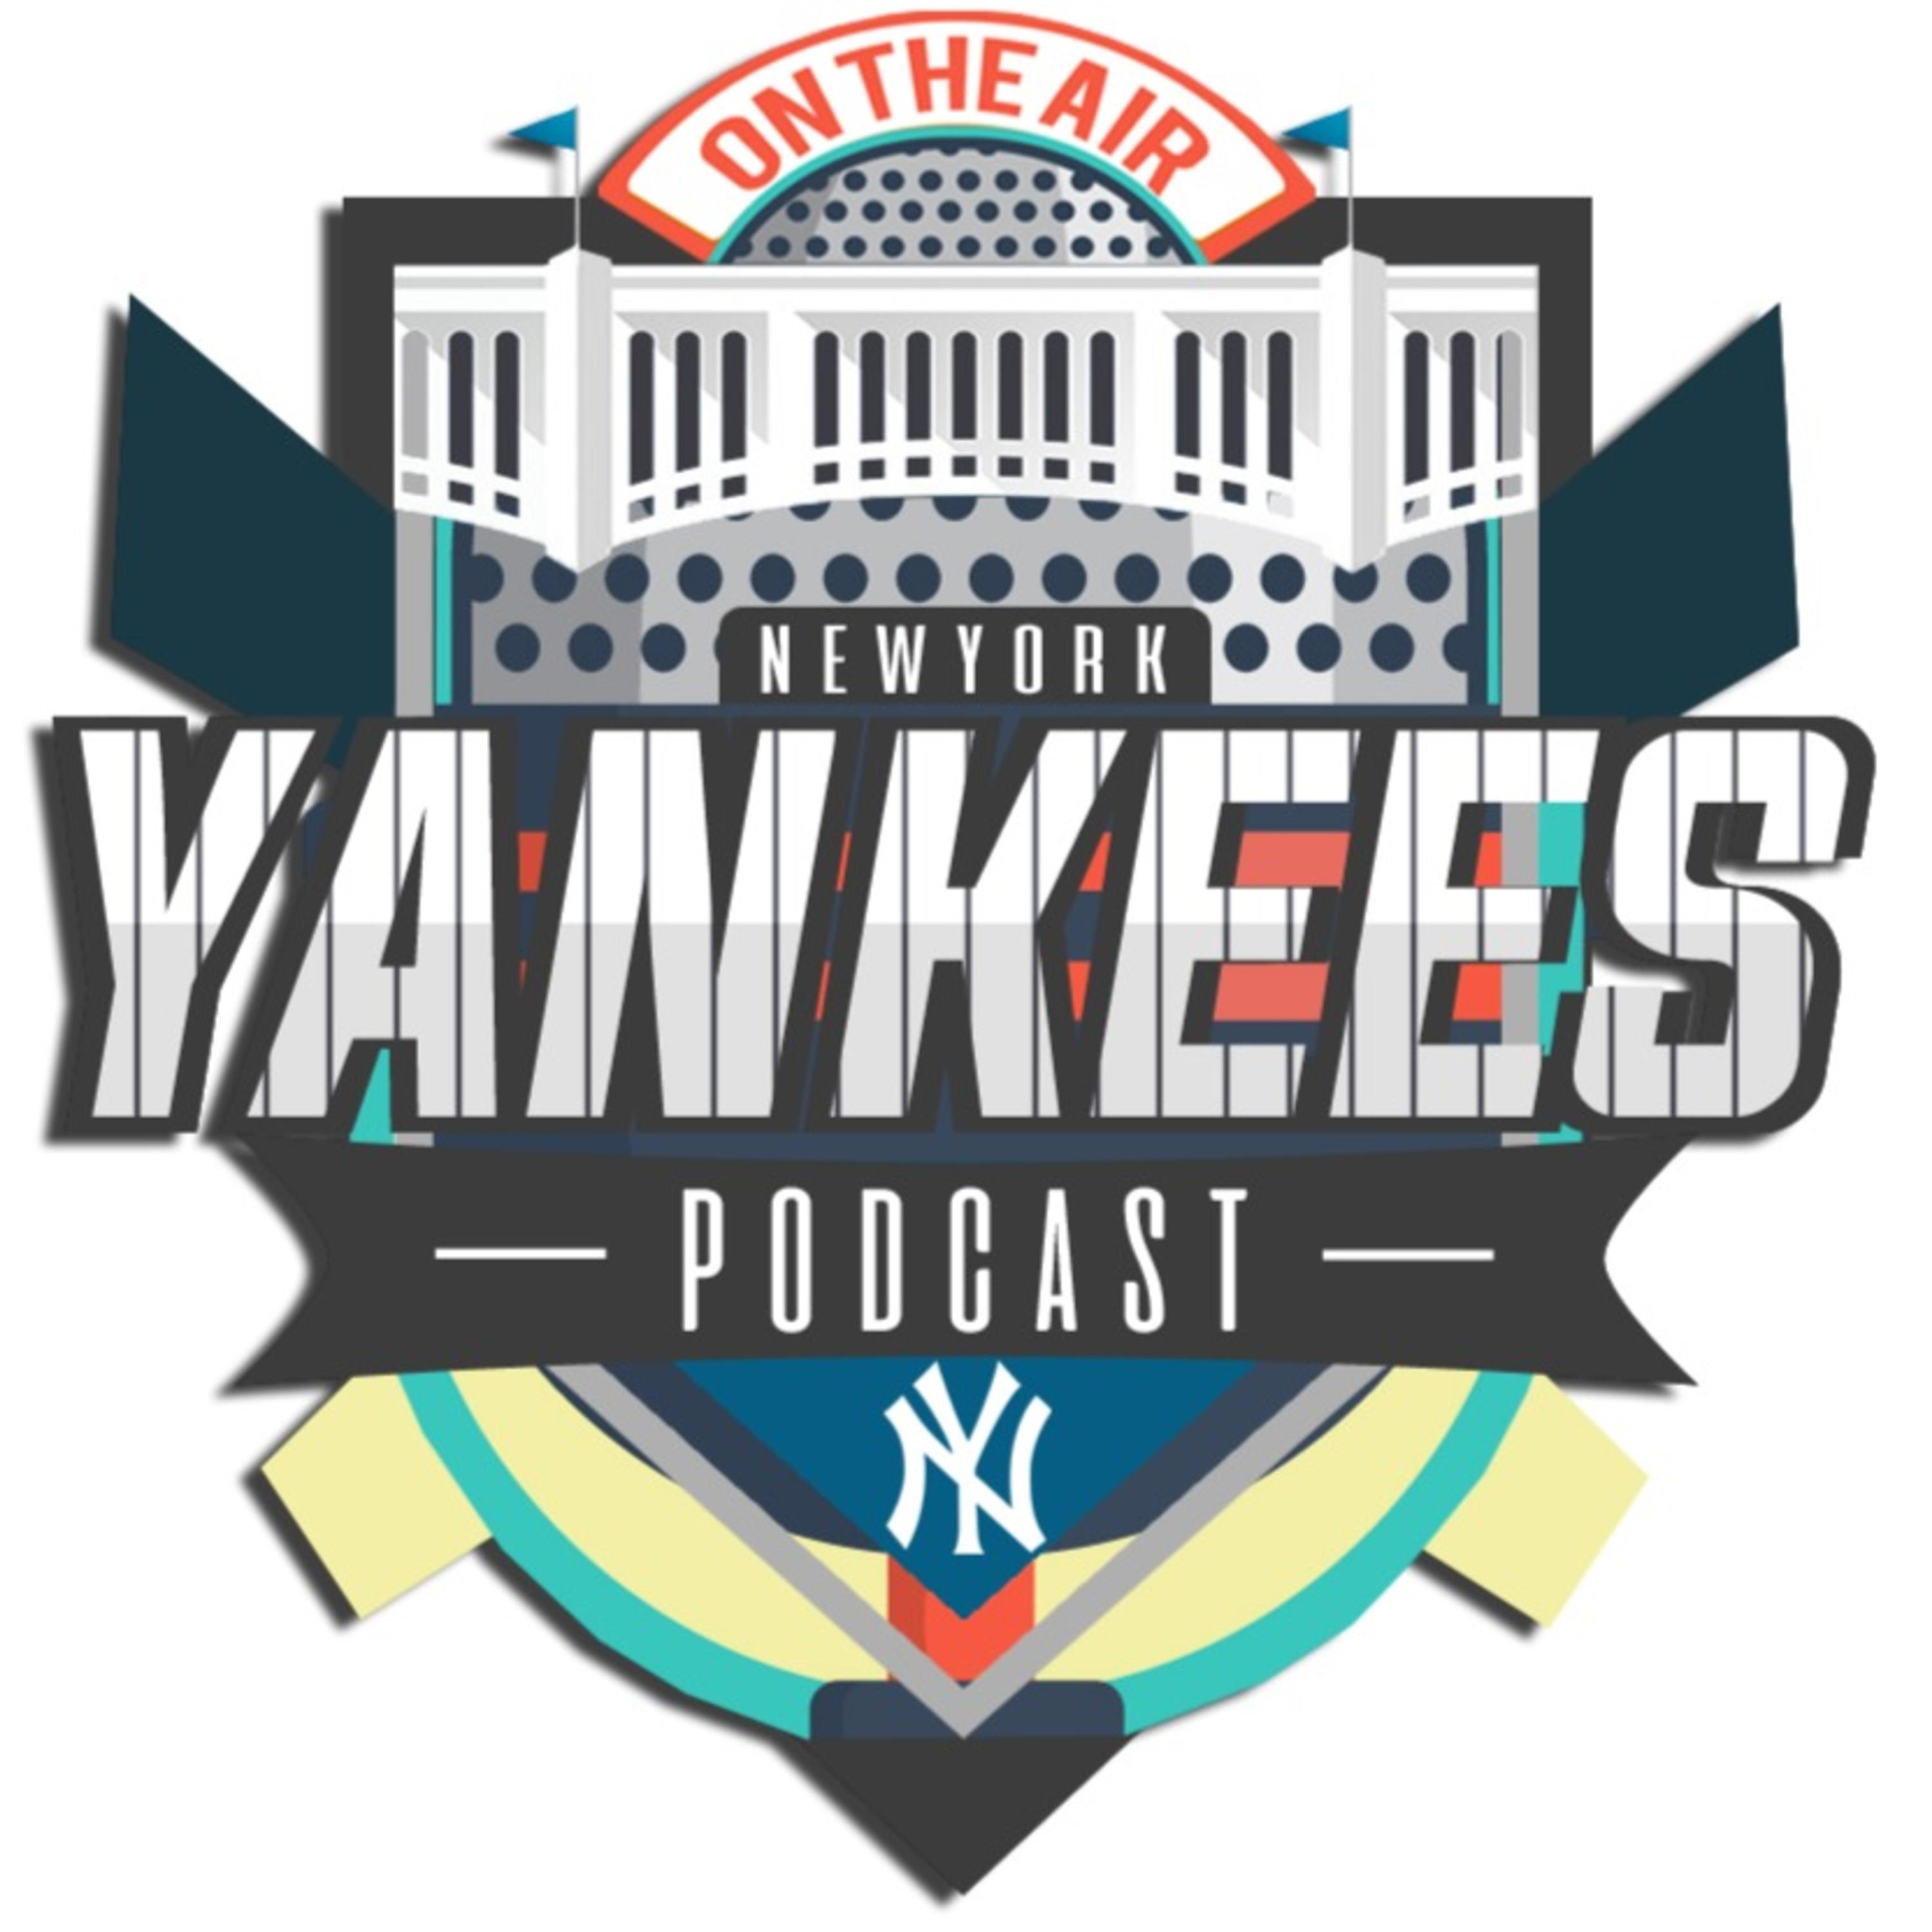 New York Yankees Hungary Podcast - Bé x DS! - S02EP19